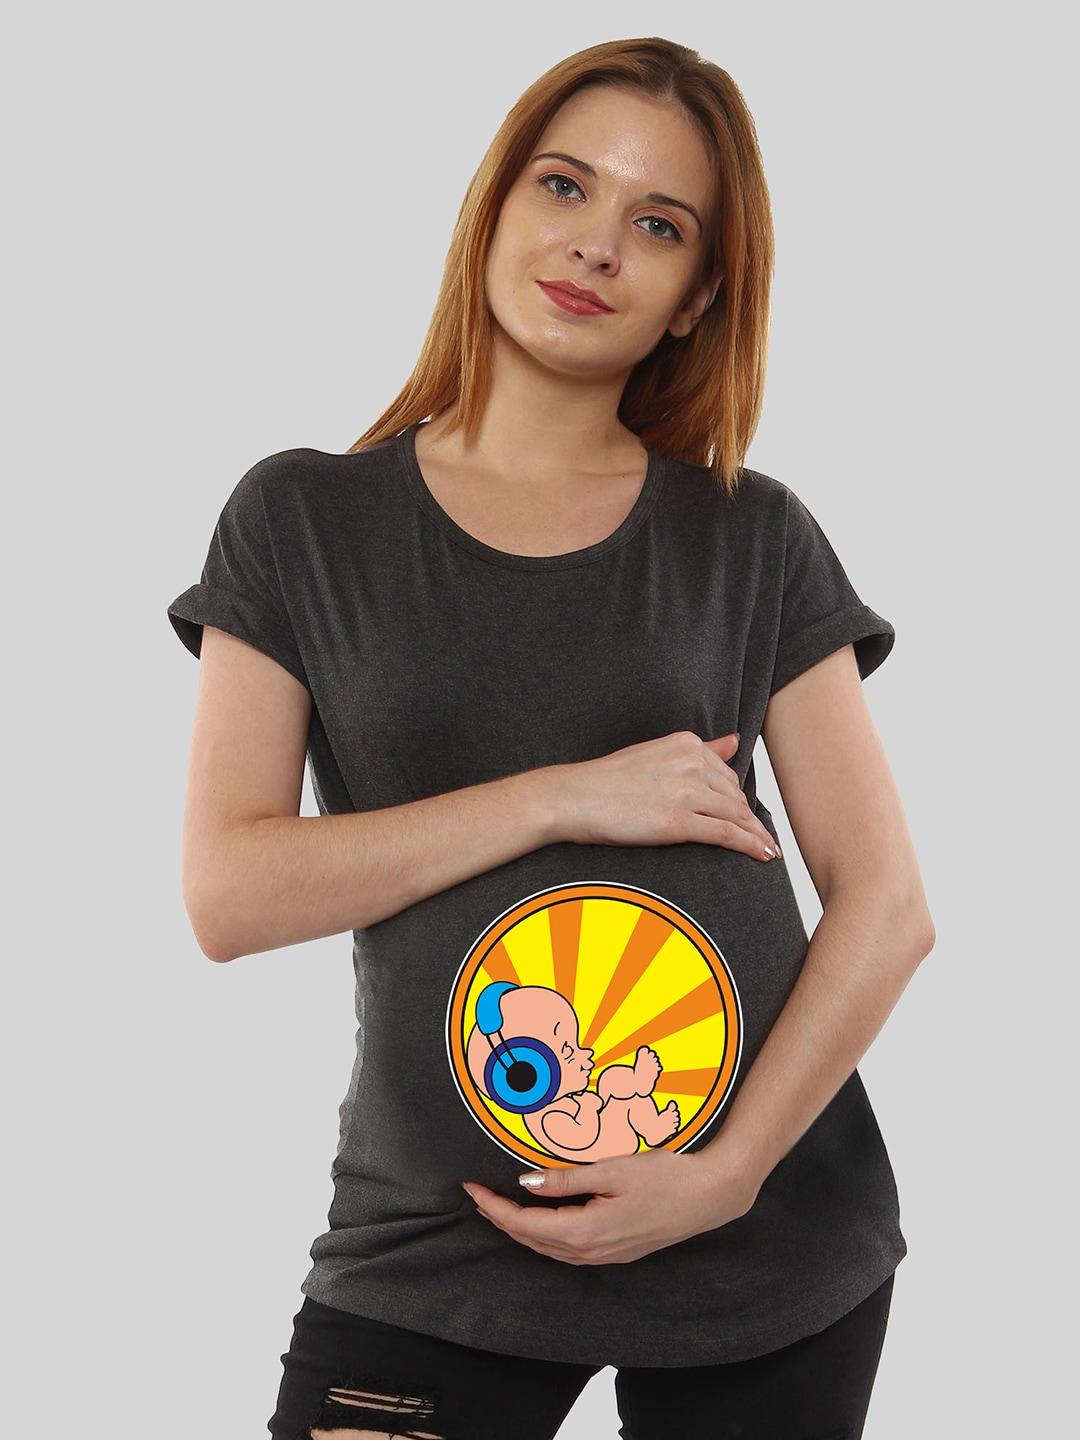 sillyboom-graphic-printed-cotton-maternity-feeding-t-shirt